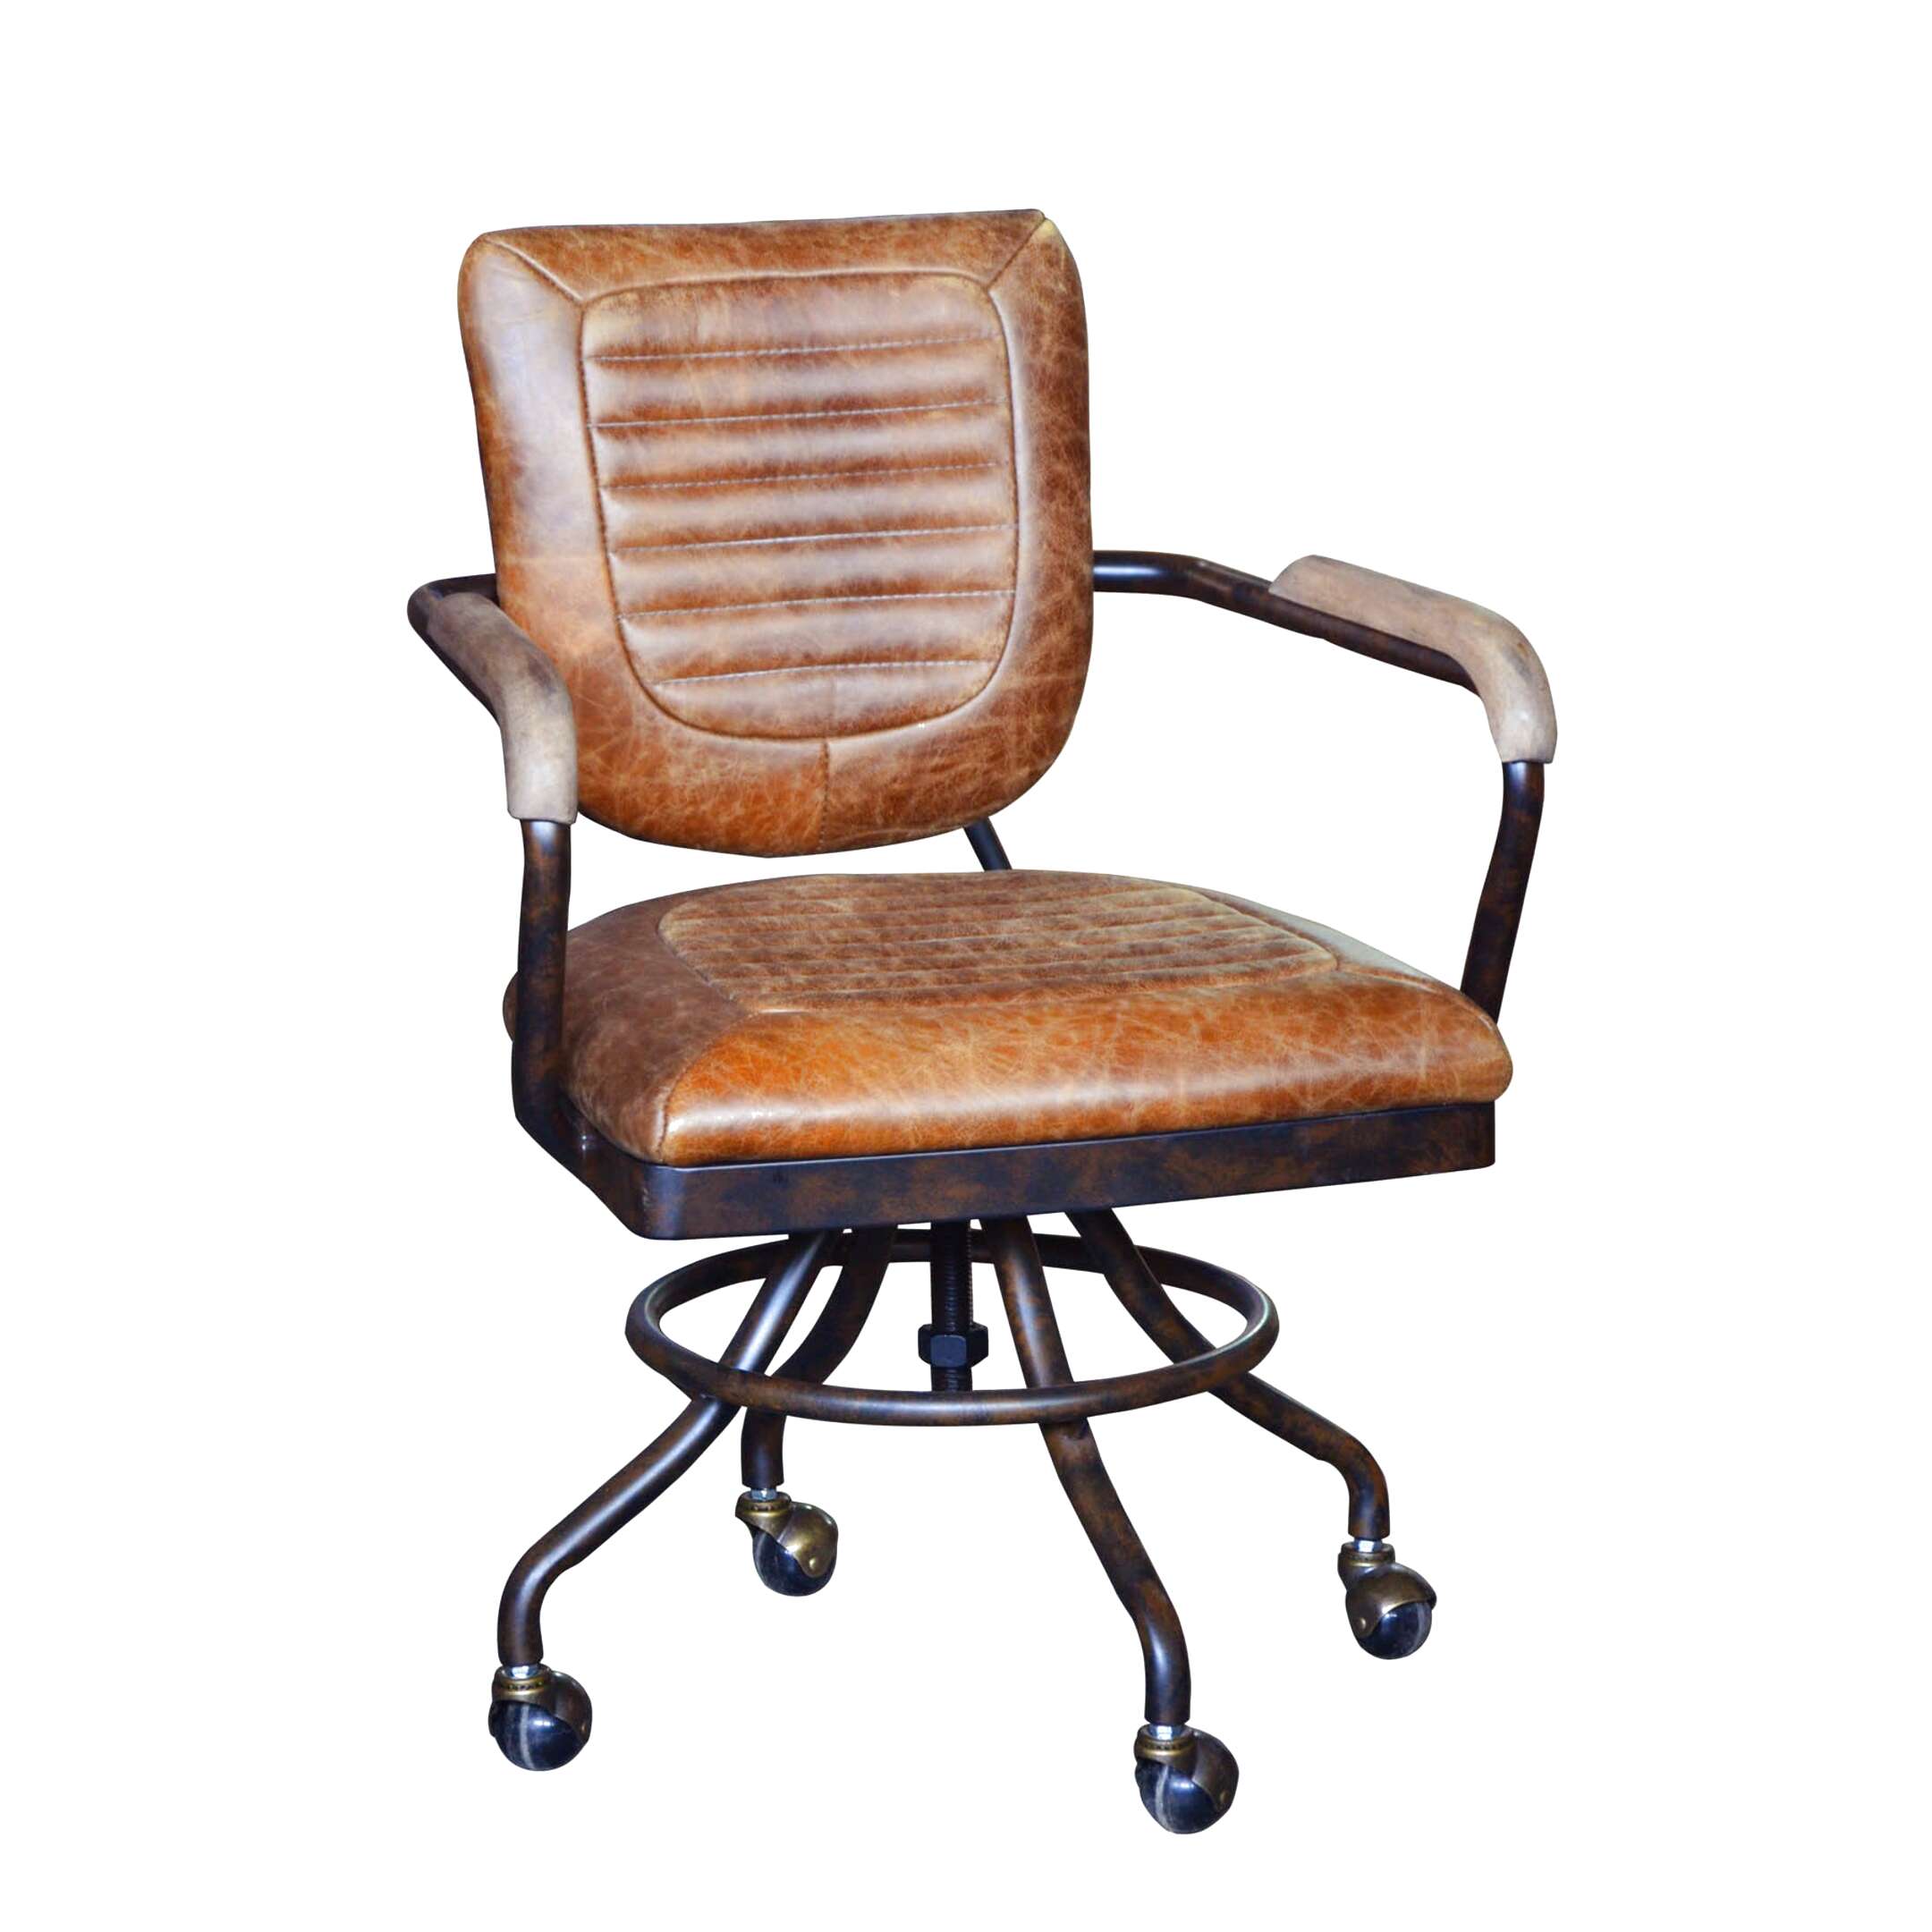 Vintage Office Chair for sale in UK | View 76 bargains